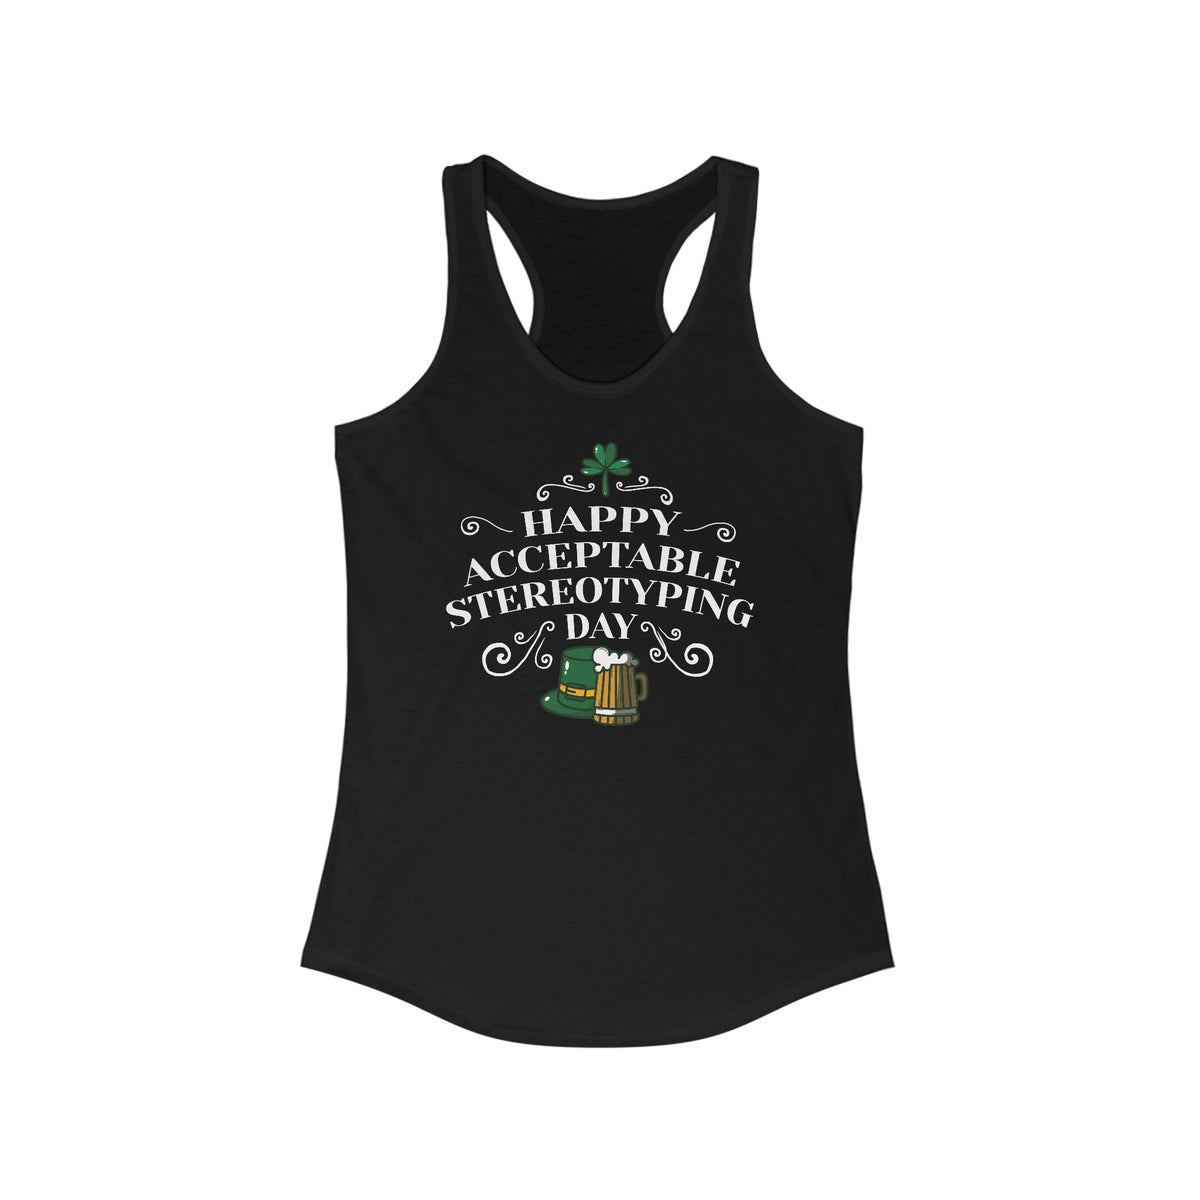 Happy Acceptable Stereotyping Day - Women’s Racerback Tank